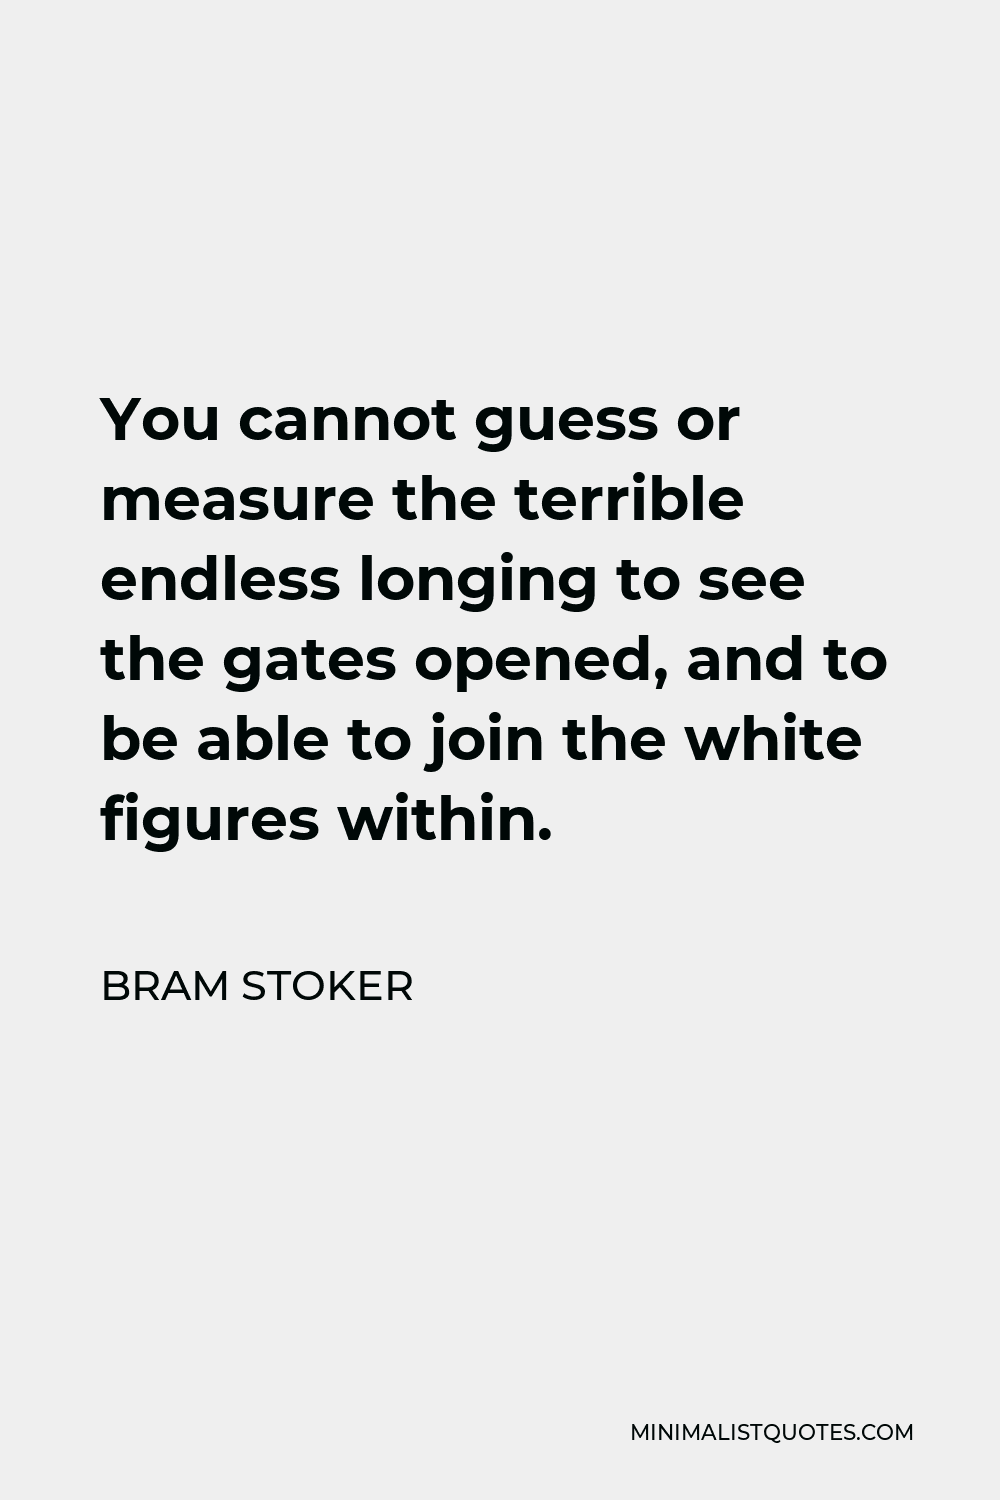 Bram Stoker Quote - You cannot guess or measure the terrible endless longing to see the gates opened, and to be able to join the white figures within.